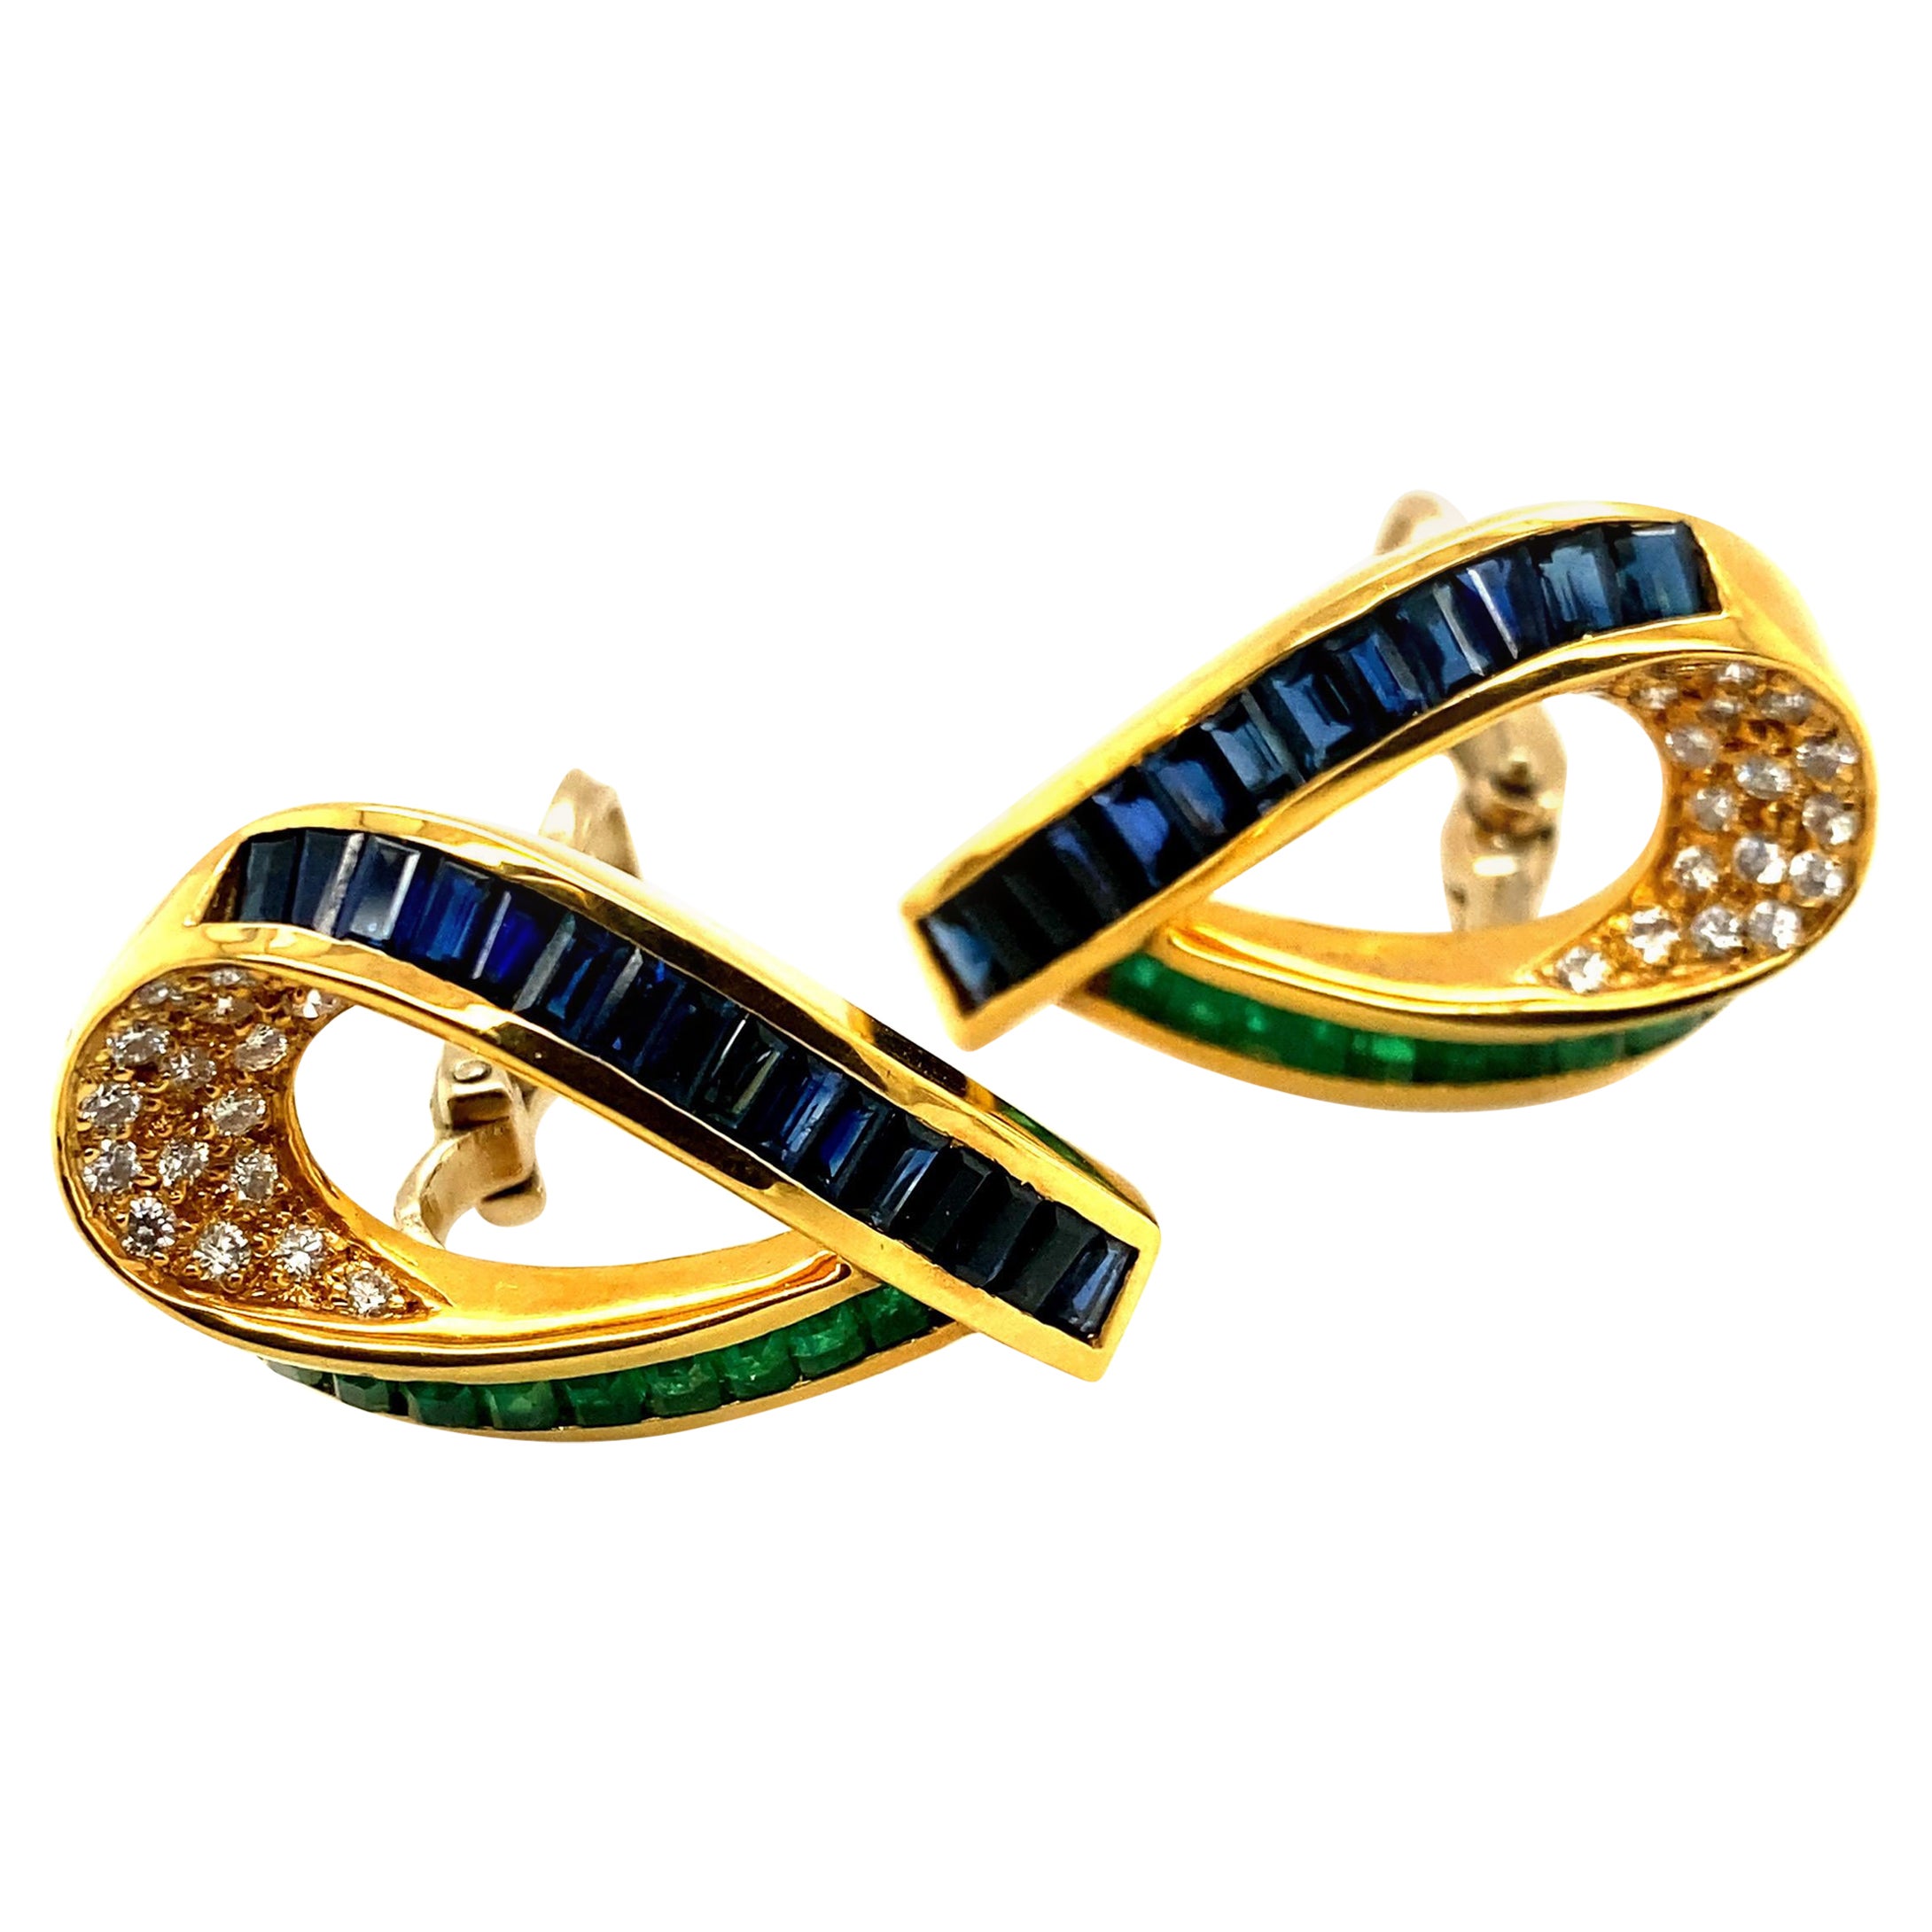 Charles Krypell 18k Yellow Gold Earrings with Blue Sapphire, Emeralds & Diamond For Sale